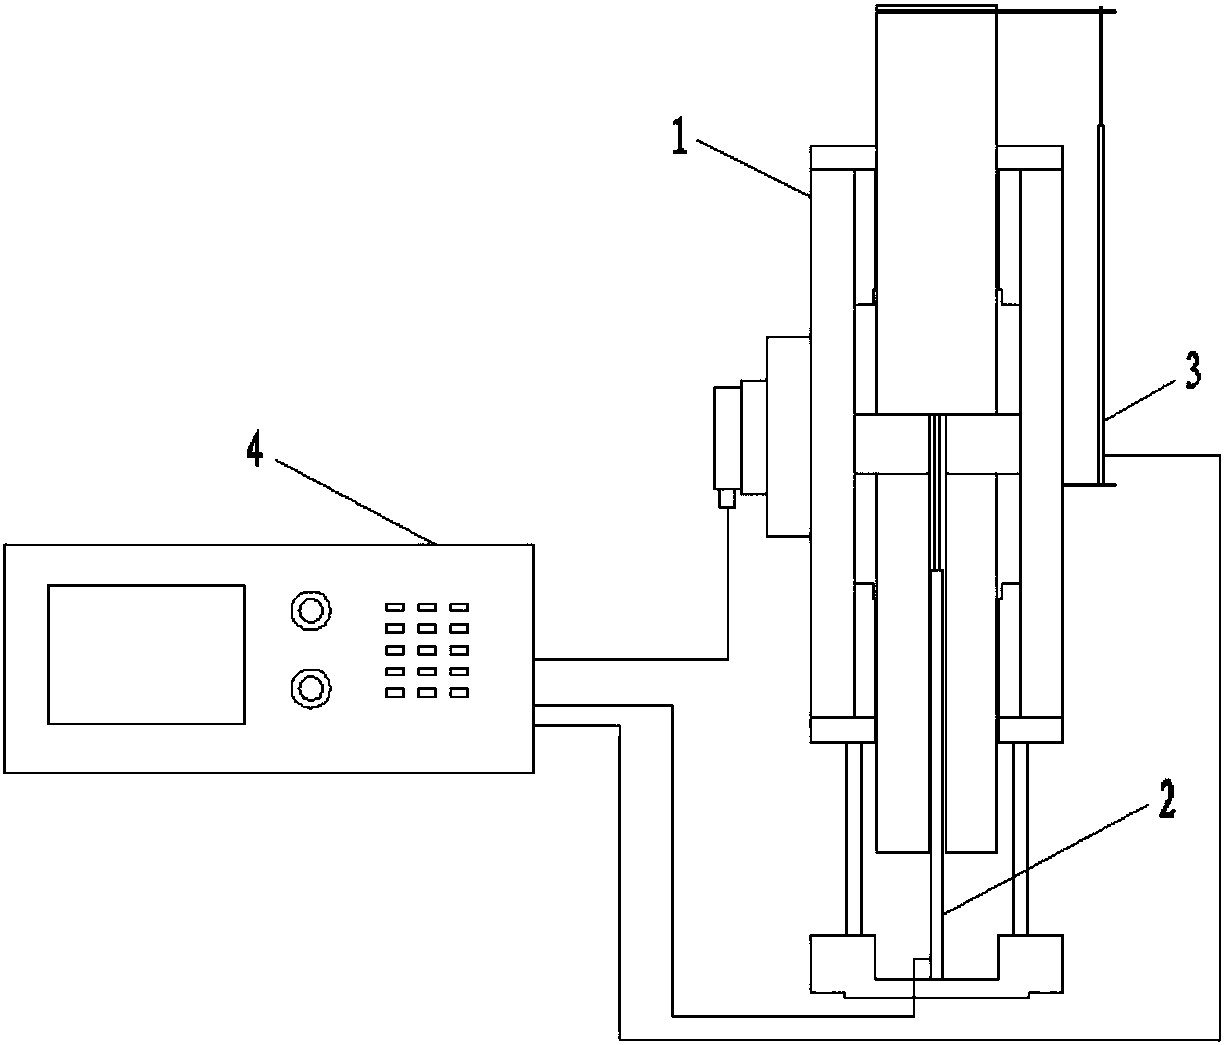 A high-precision displacement control hydraulic cylinder system and its control method